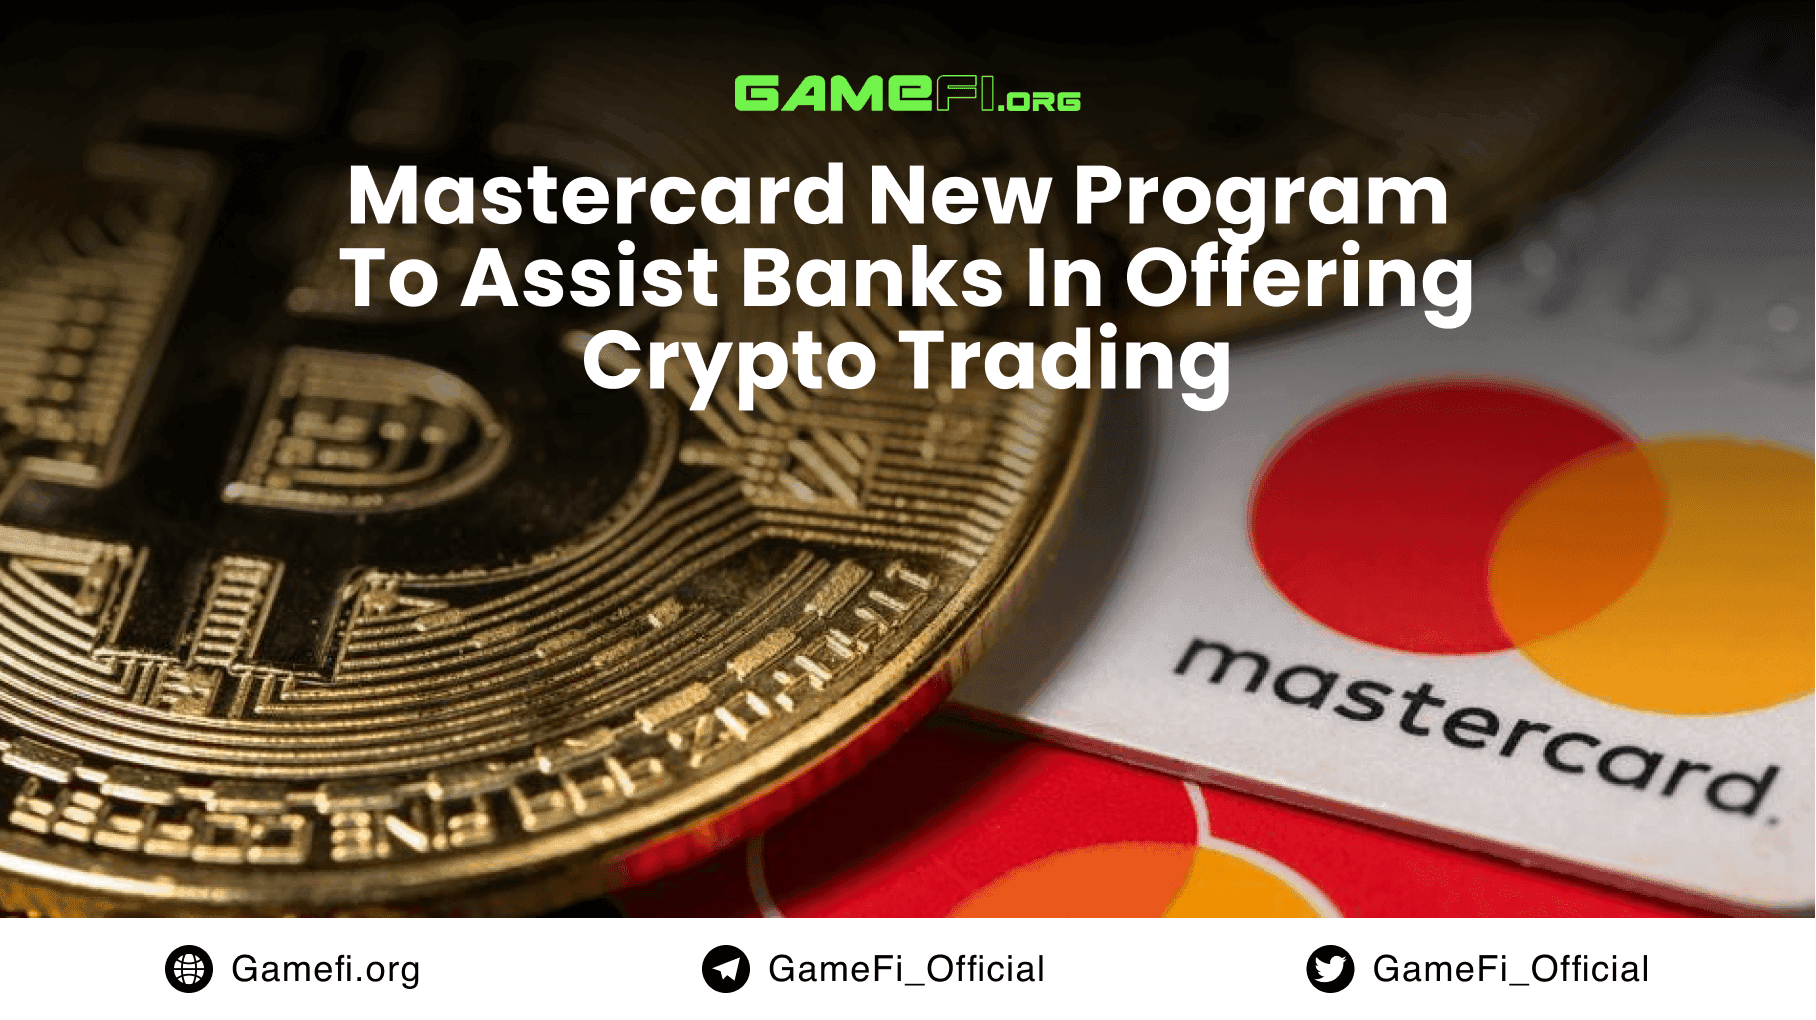 Mastercard New Program to Assist Banks in Offering Crypto Trading